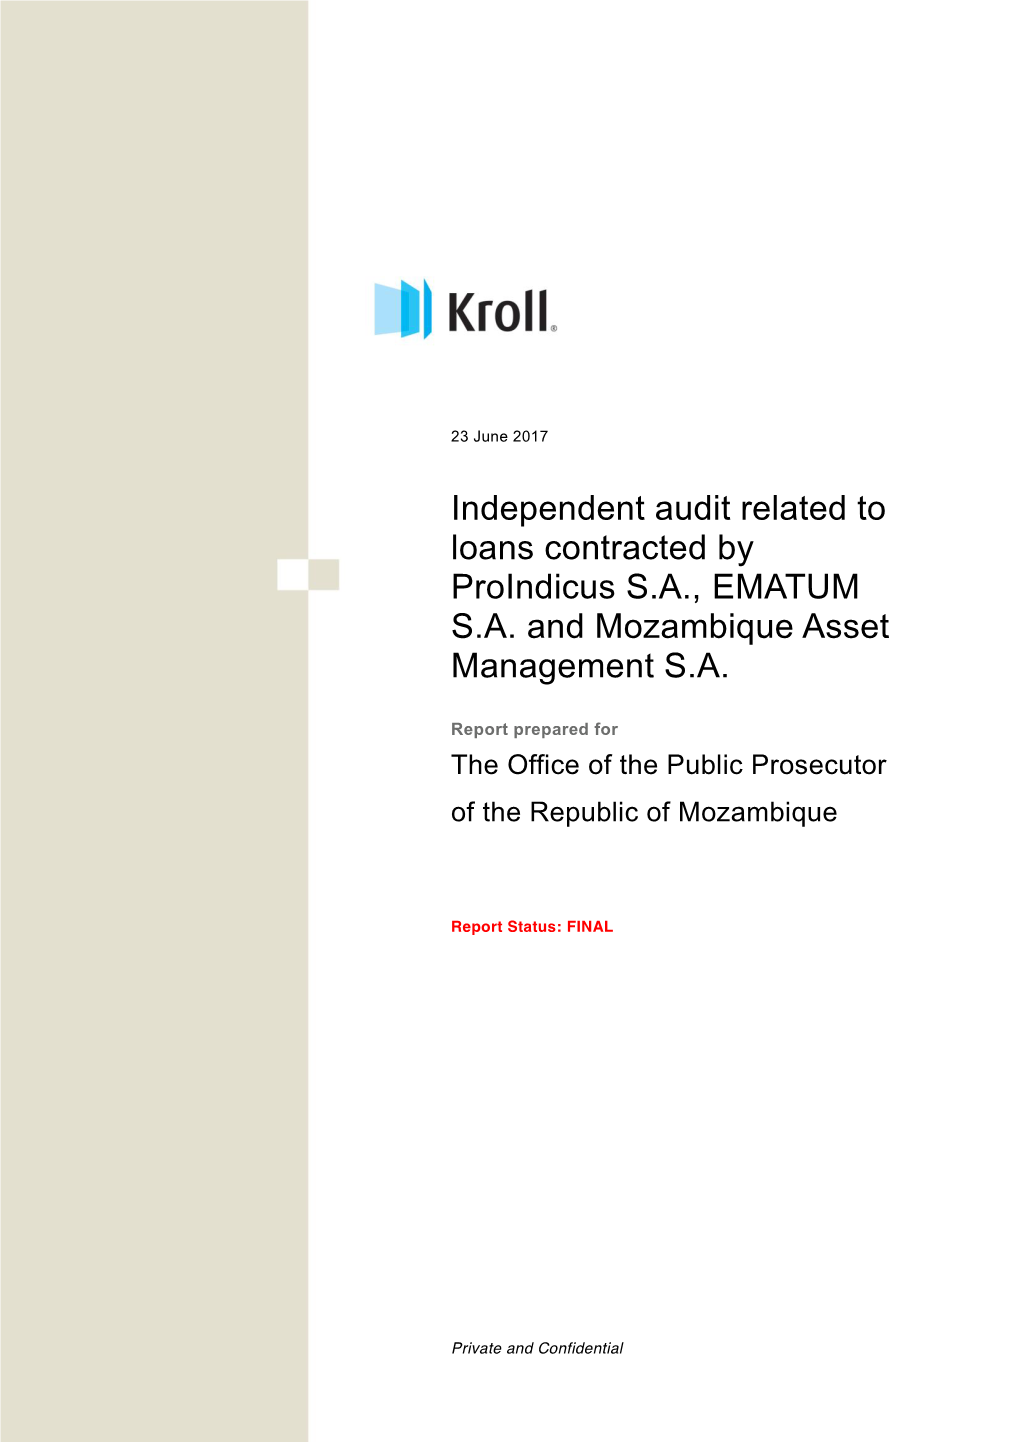 Independent Audit Related to Loans Contracted by Proindicus SA